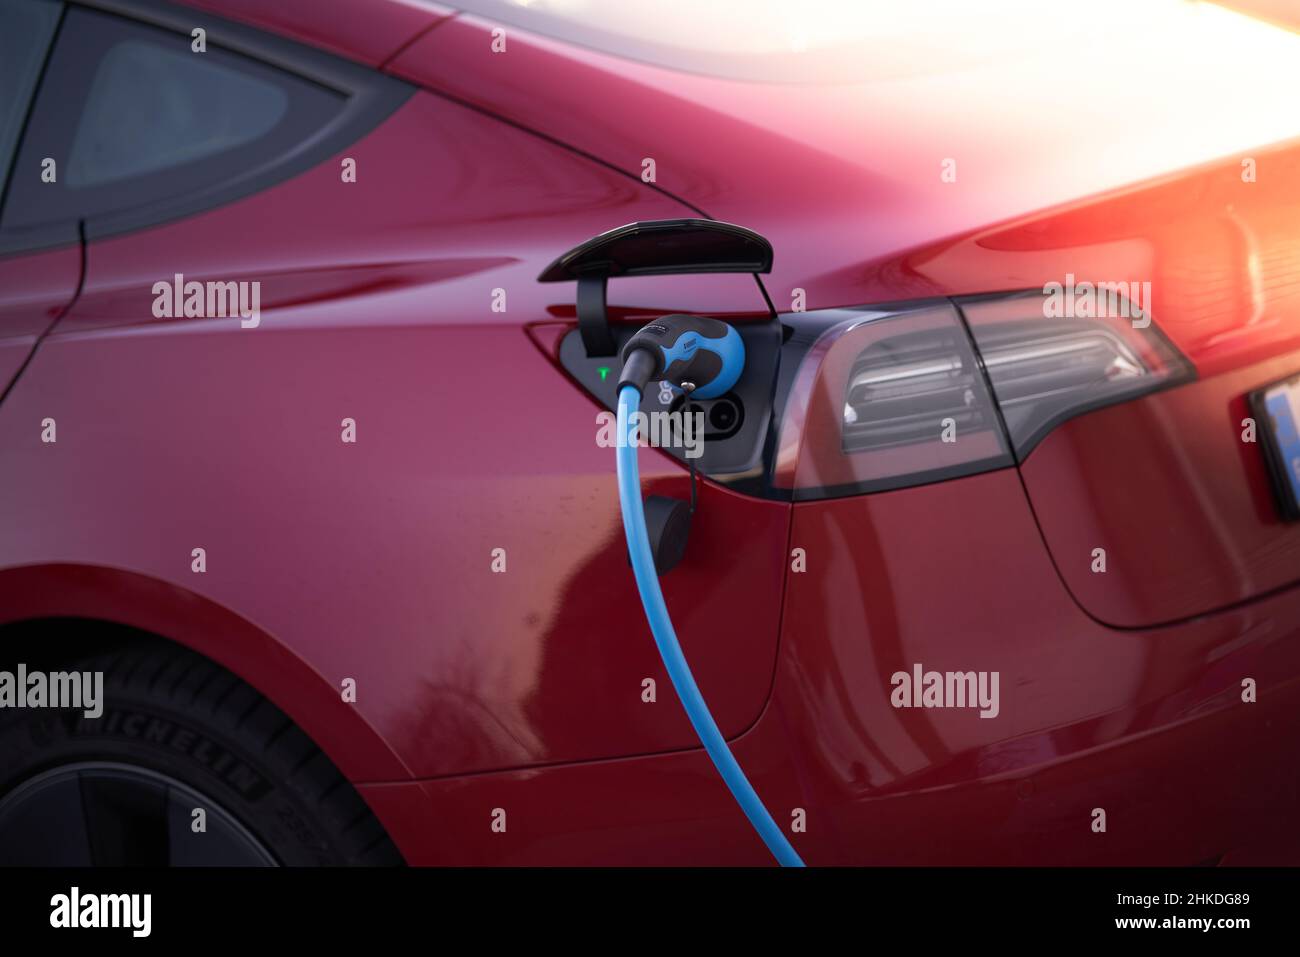 Modern red electric vehicle at the time of charging connected to charging station. Stock Photo